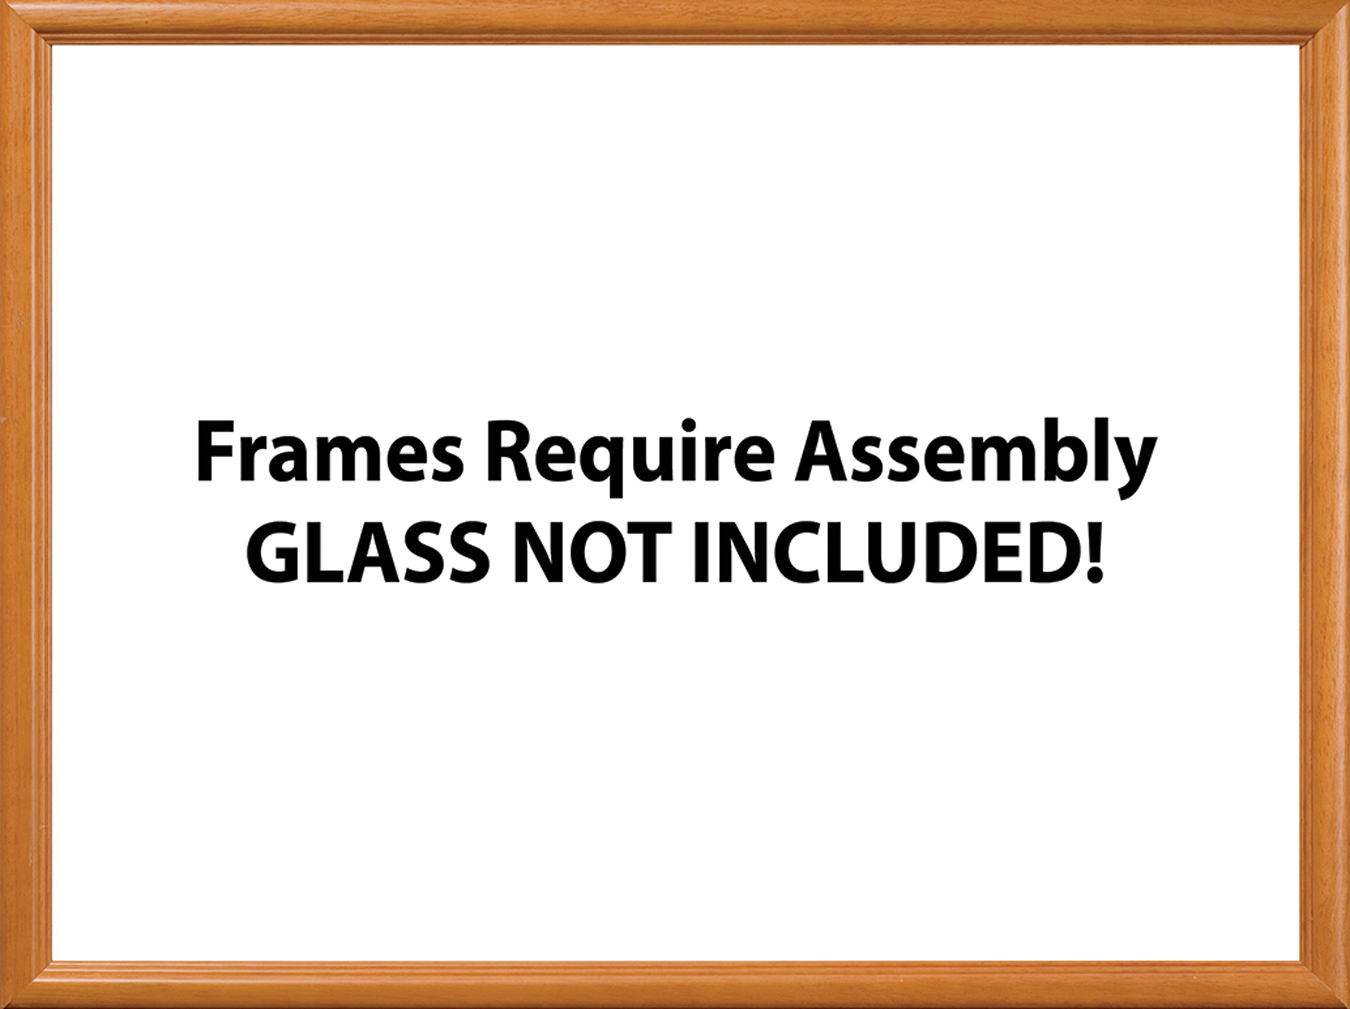 18" x 24" Wood Puzzle Frame